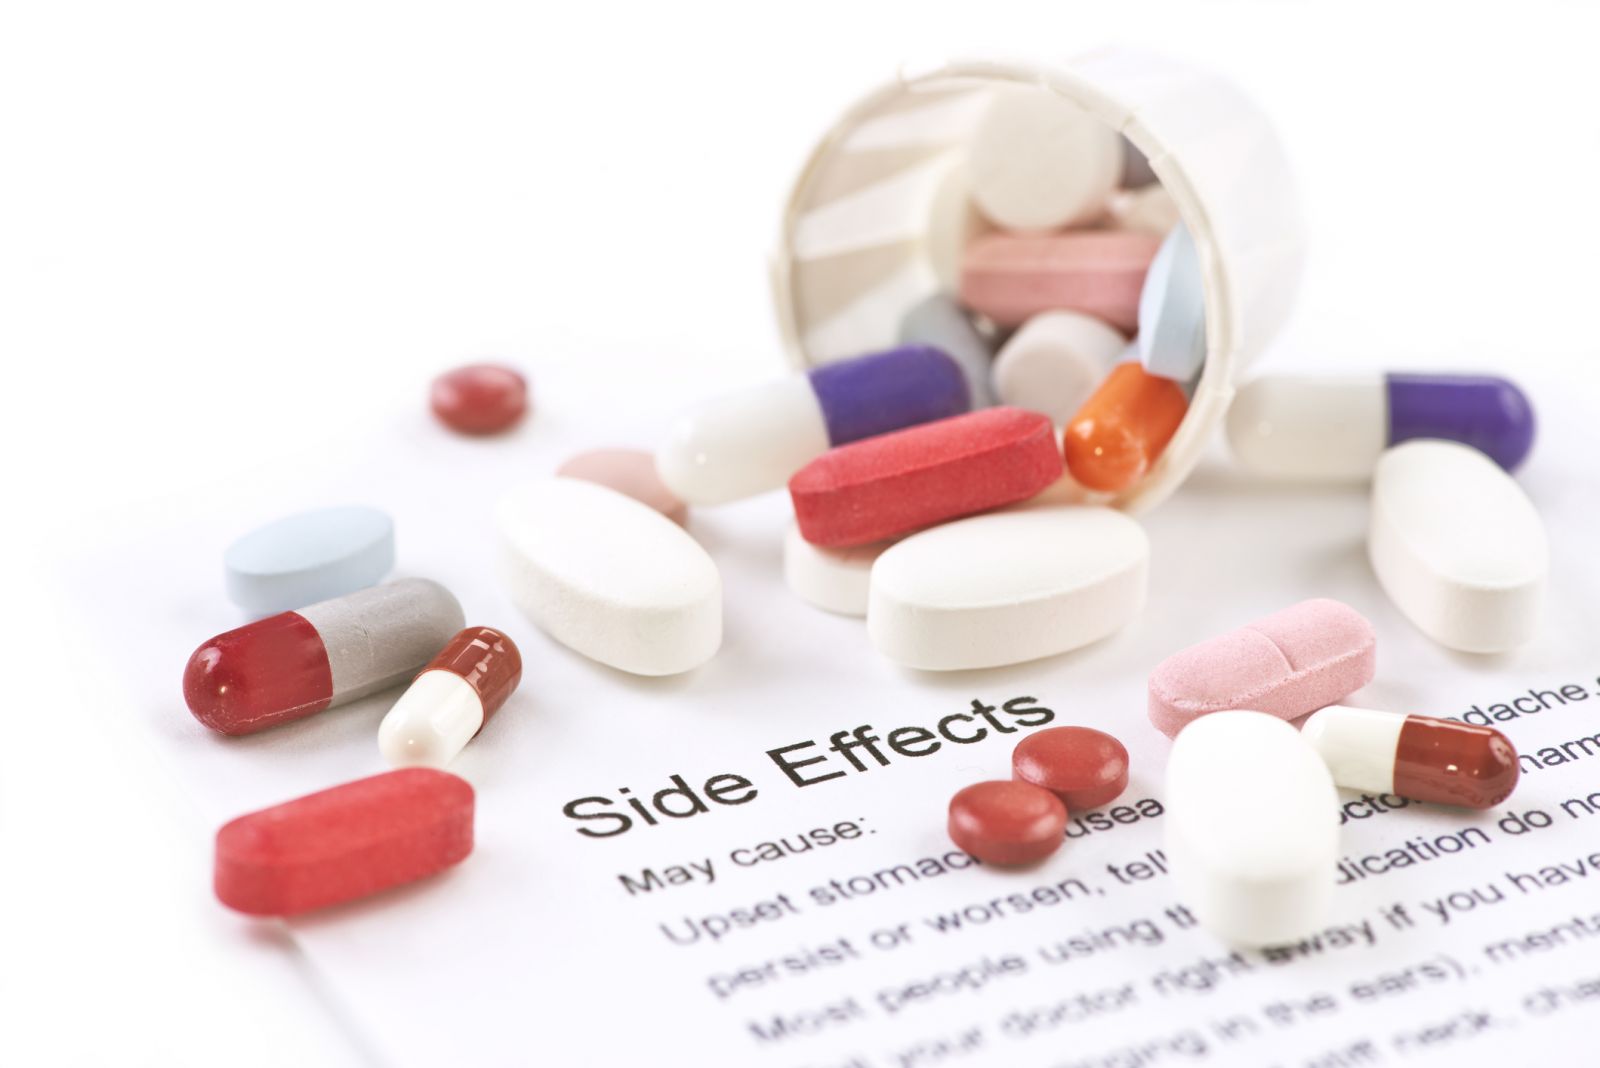 Side Effects of Medications: A Sexual Health Problem